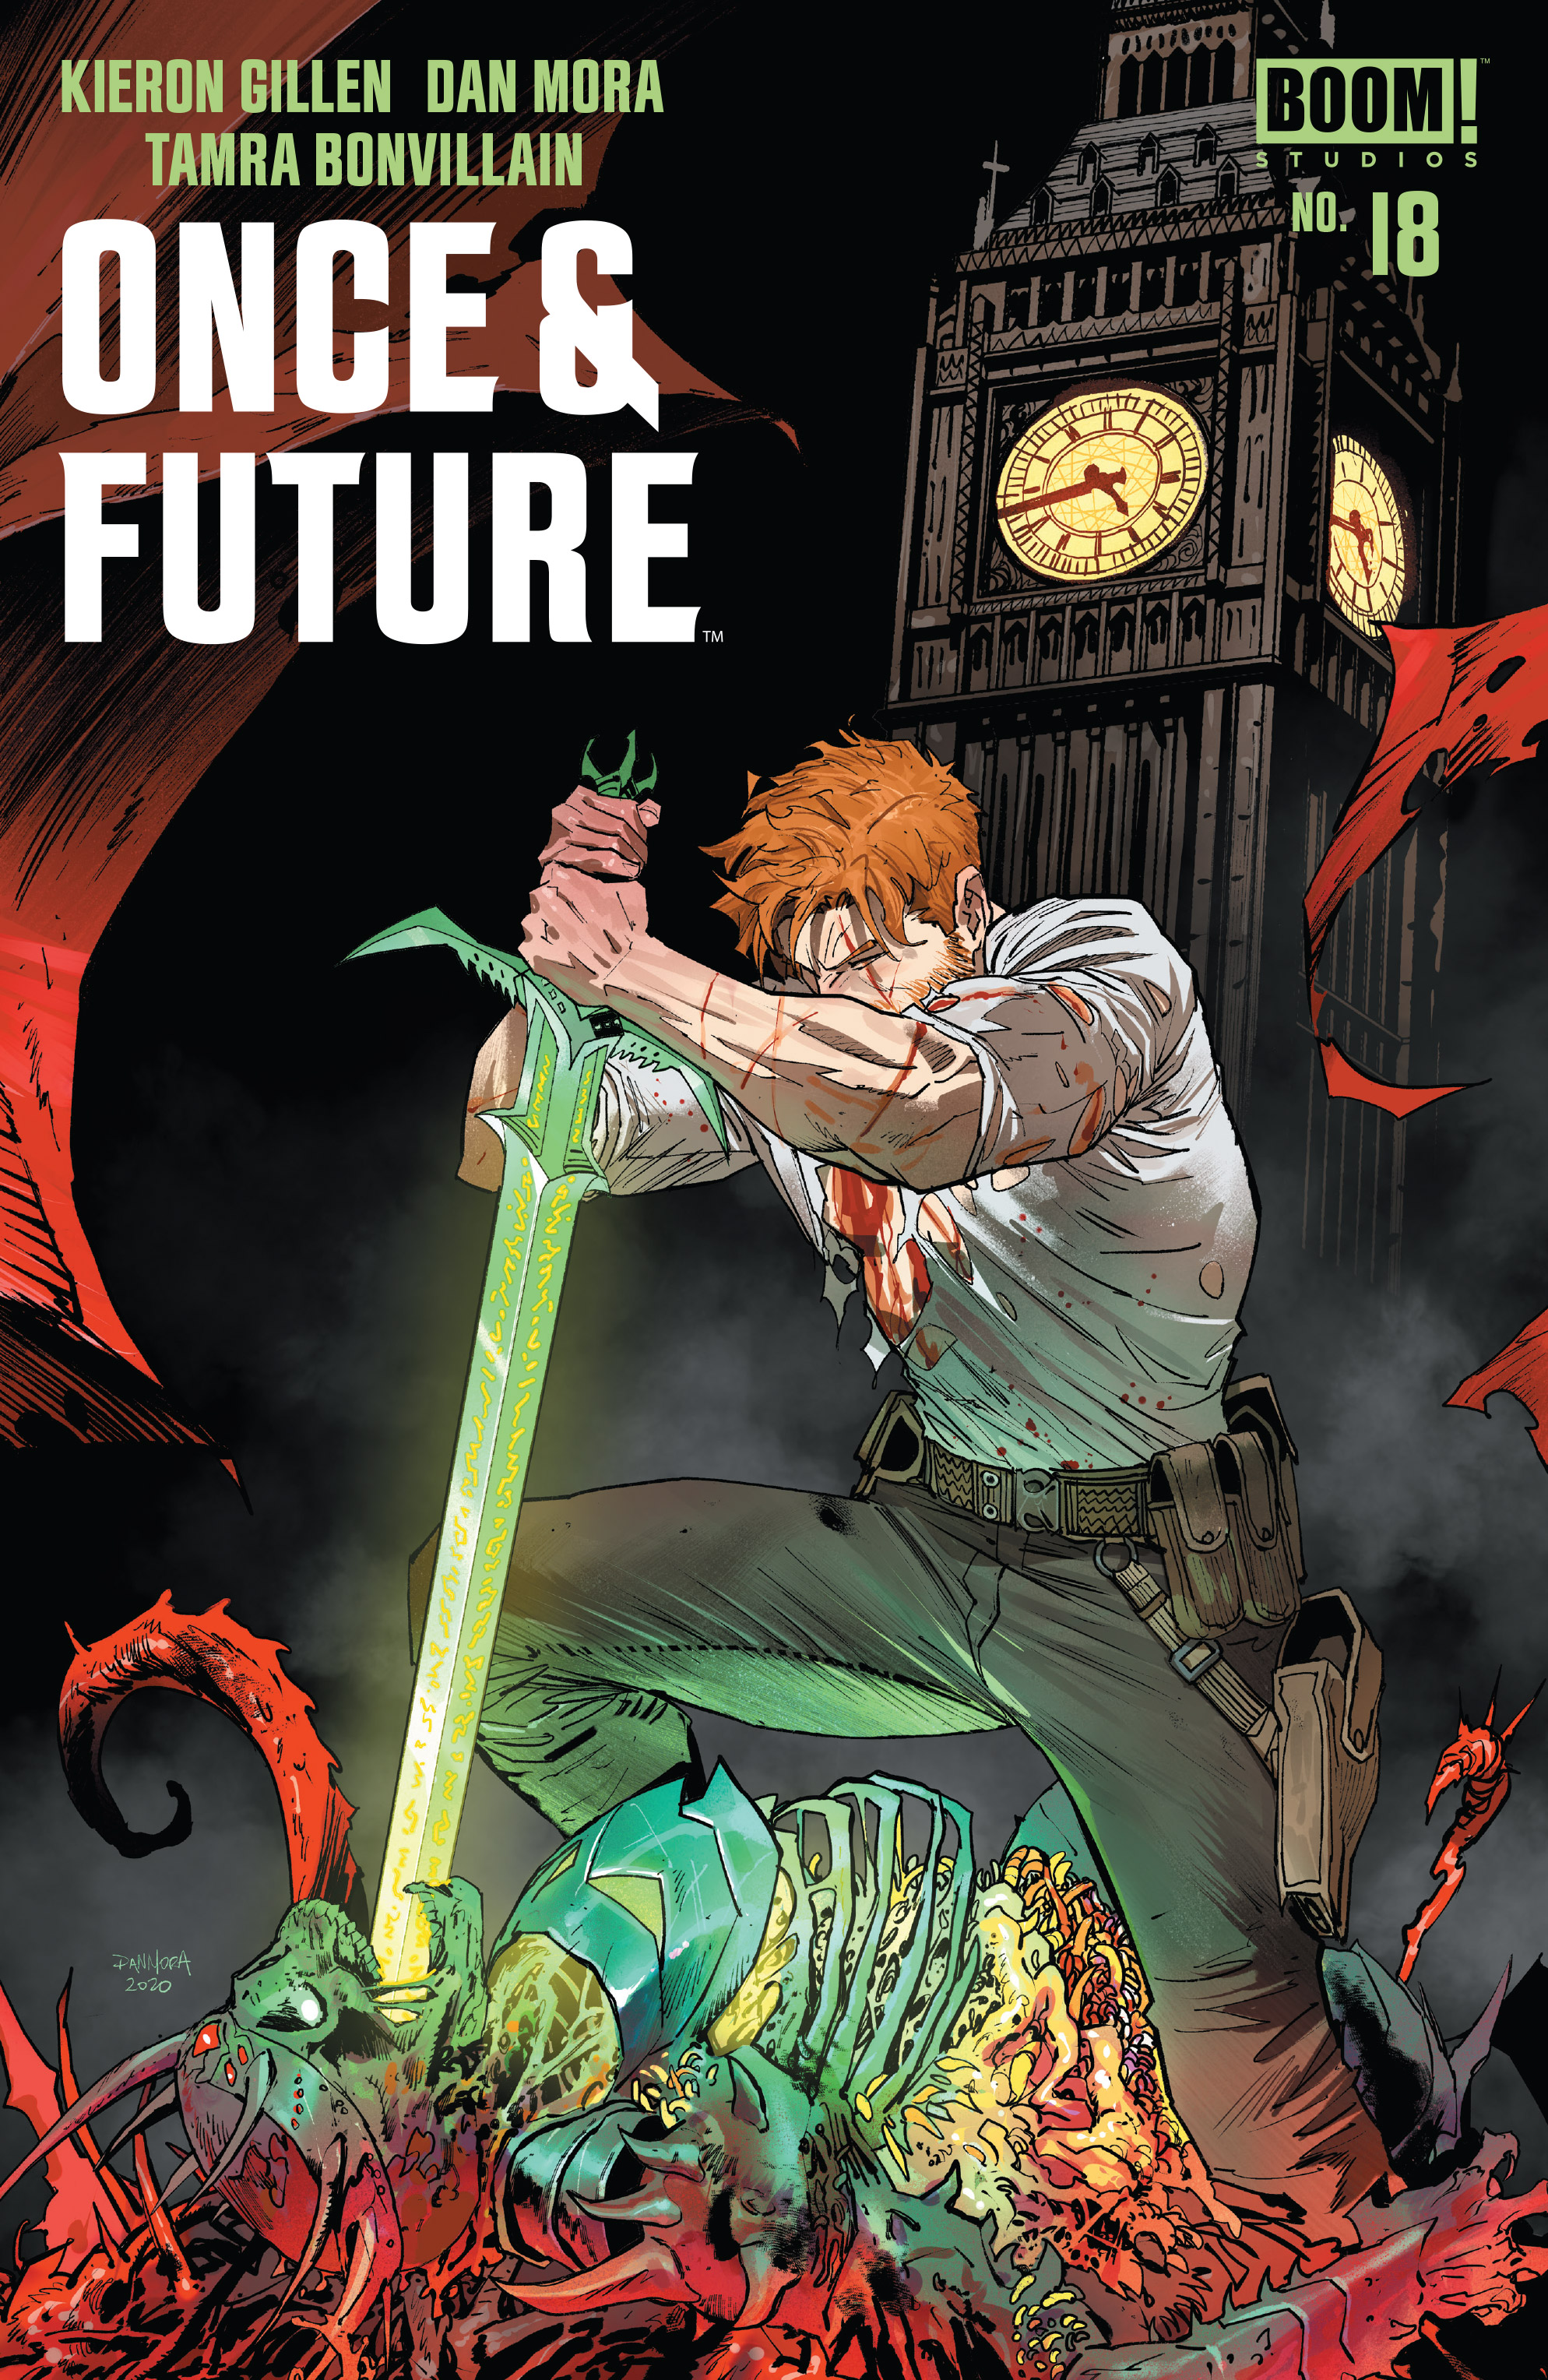 Read online Once & Future comic -  Issue #18 - 1